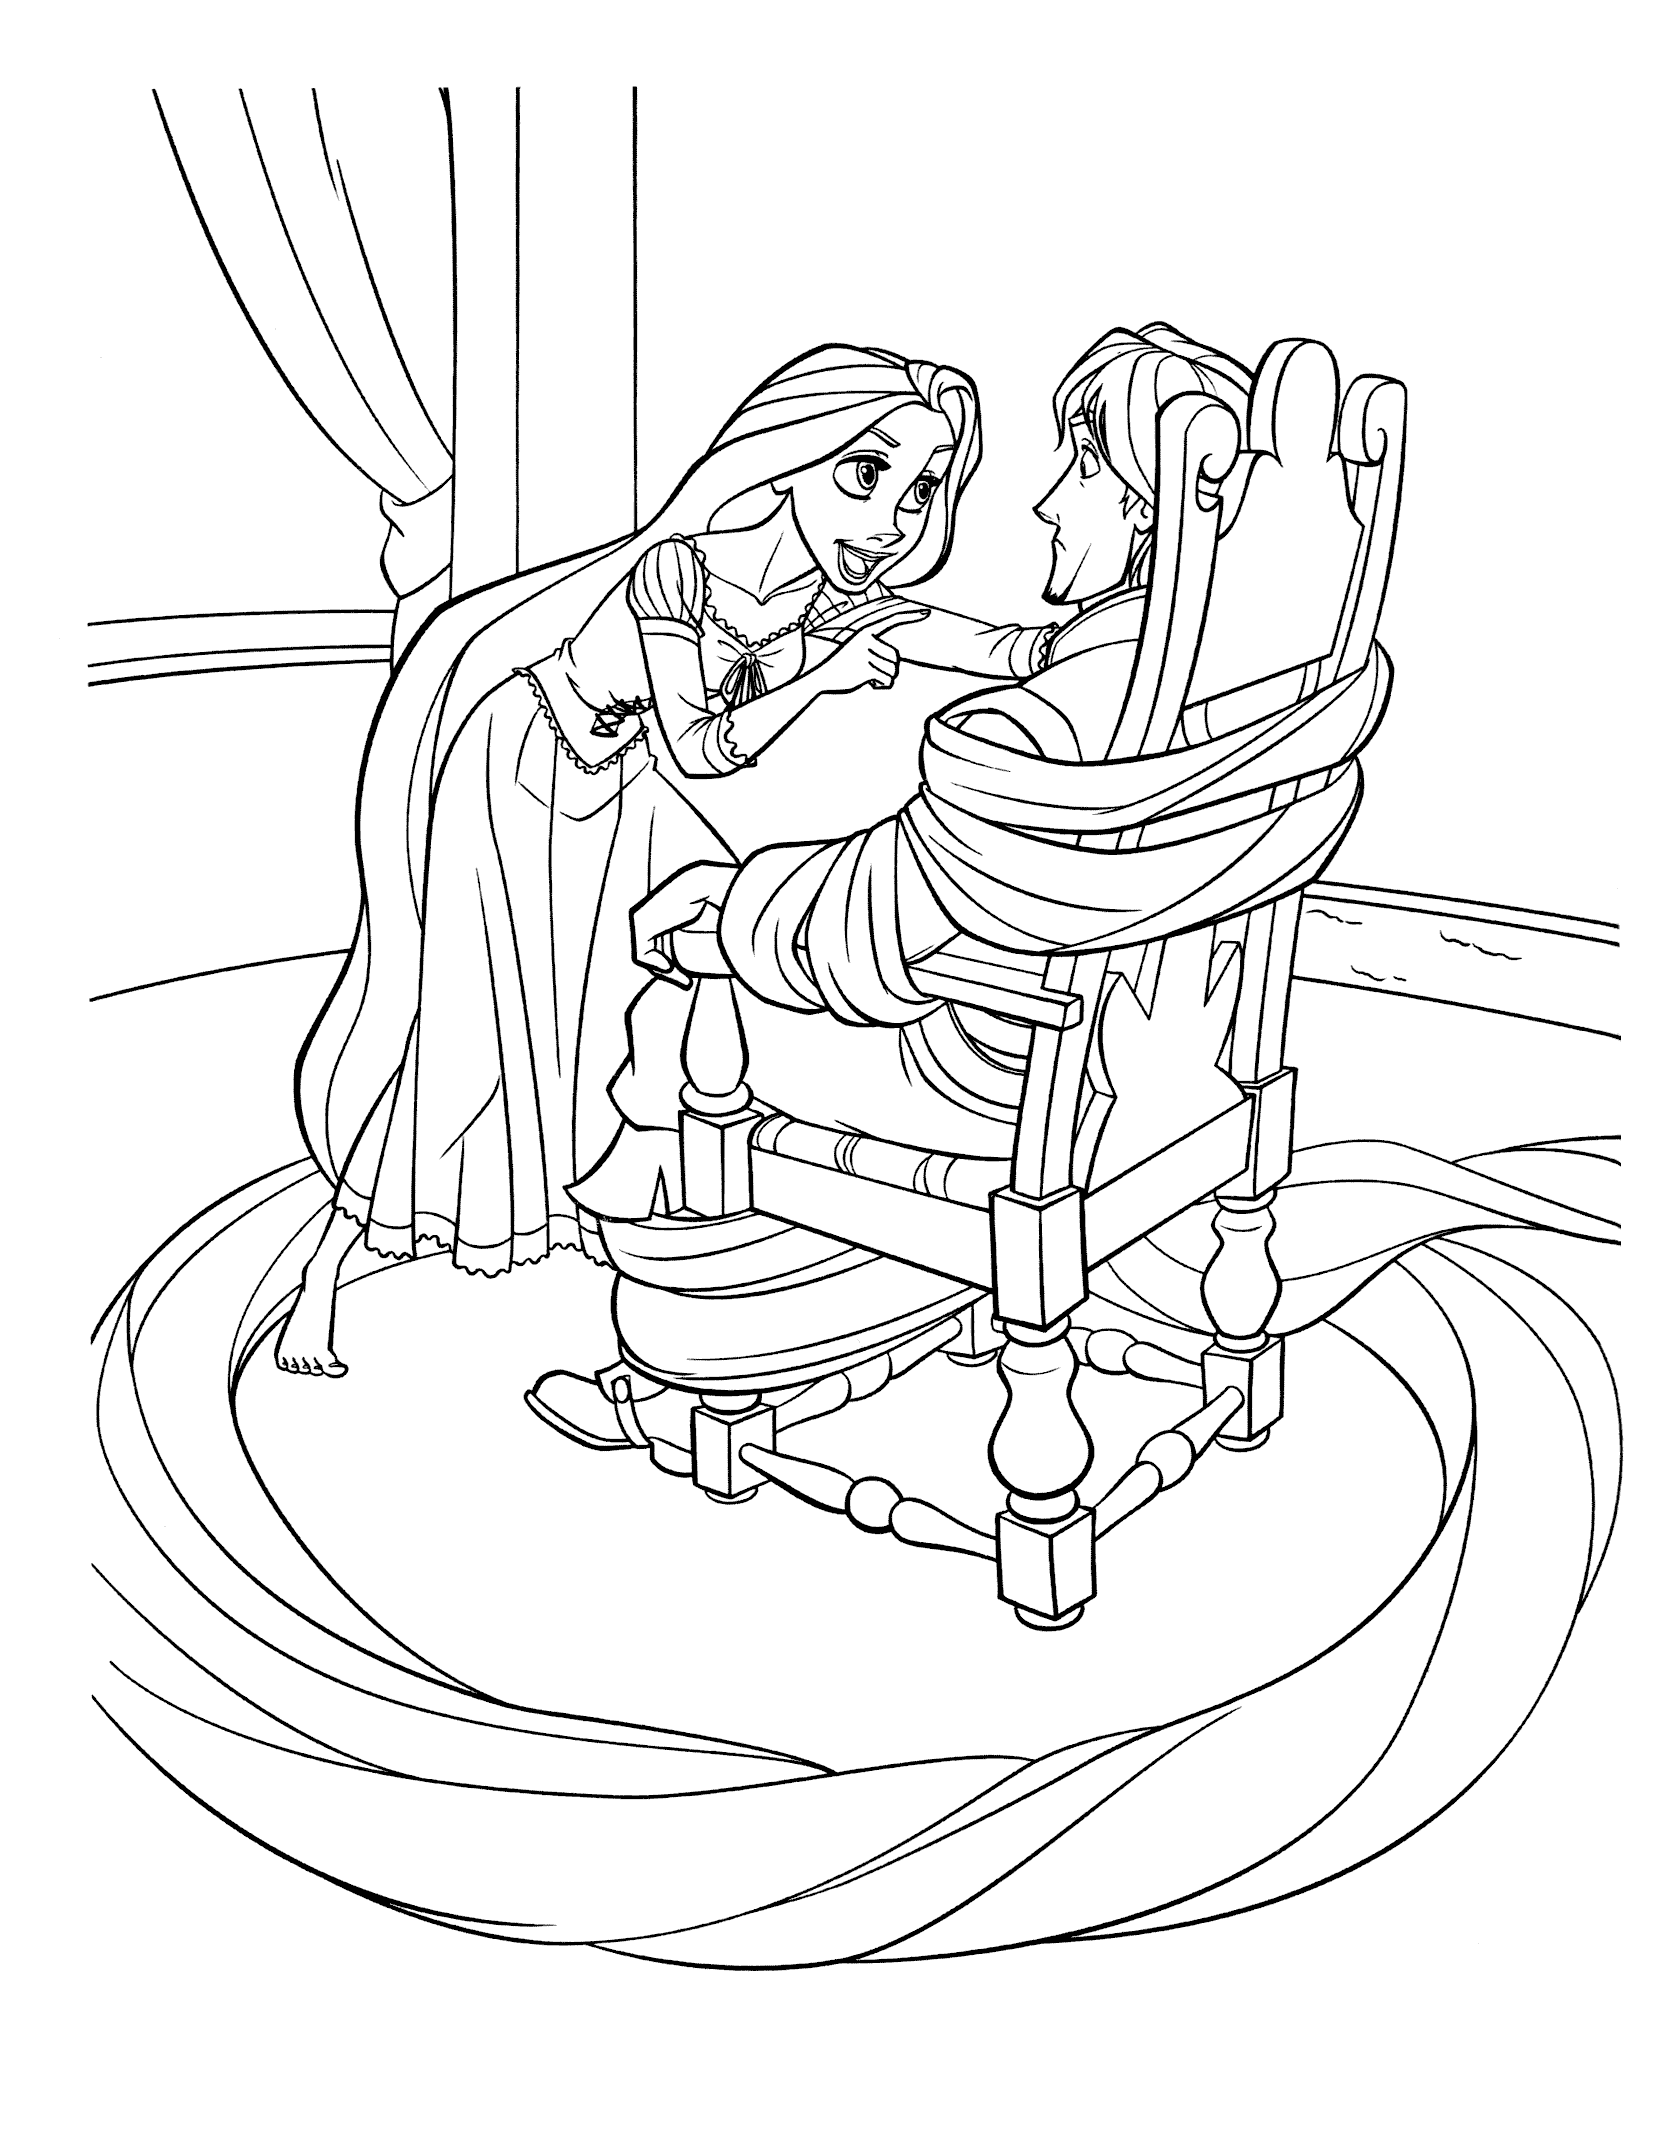 Coloring page - Associated hair